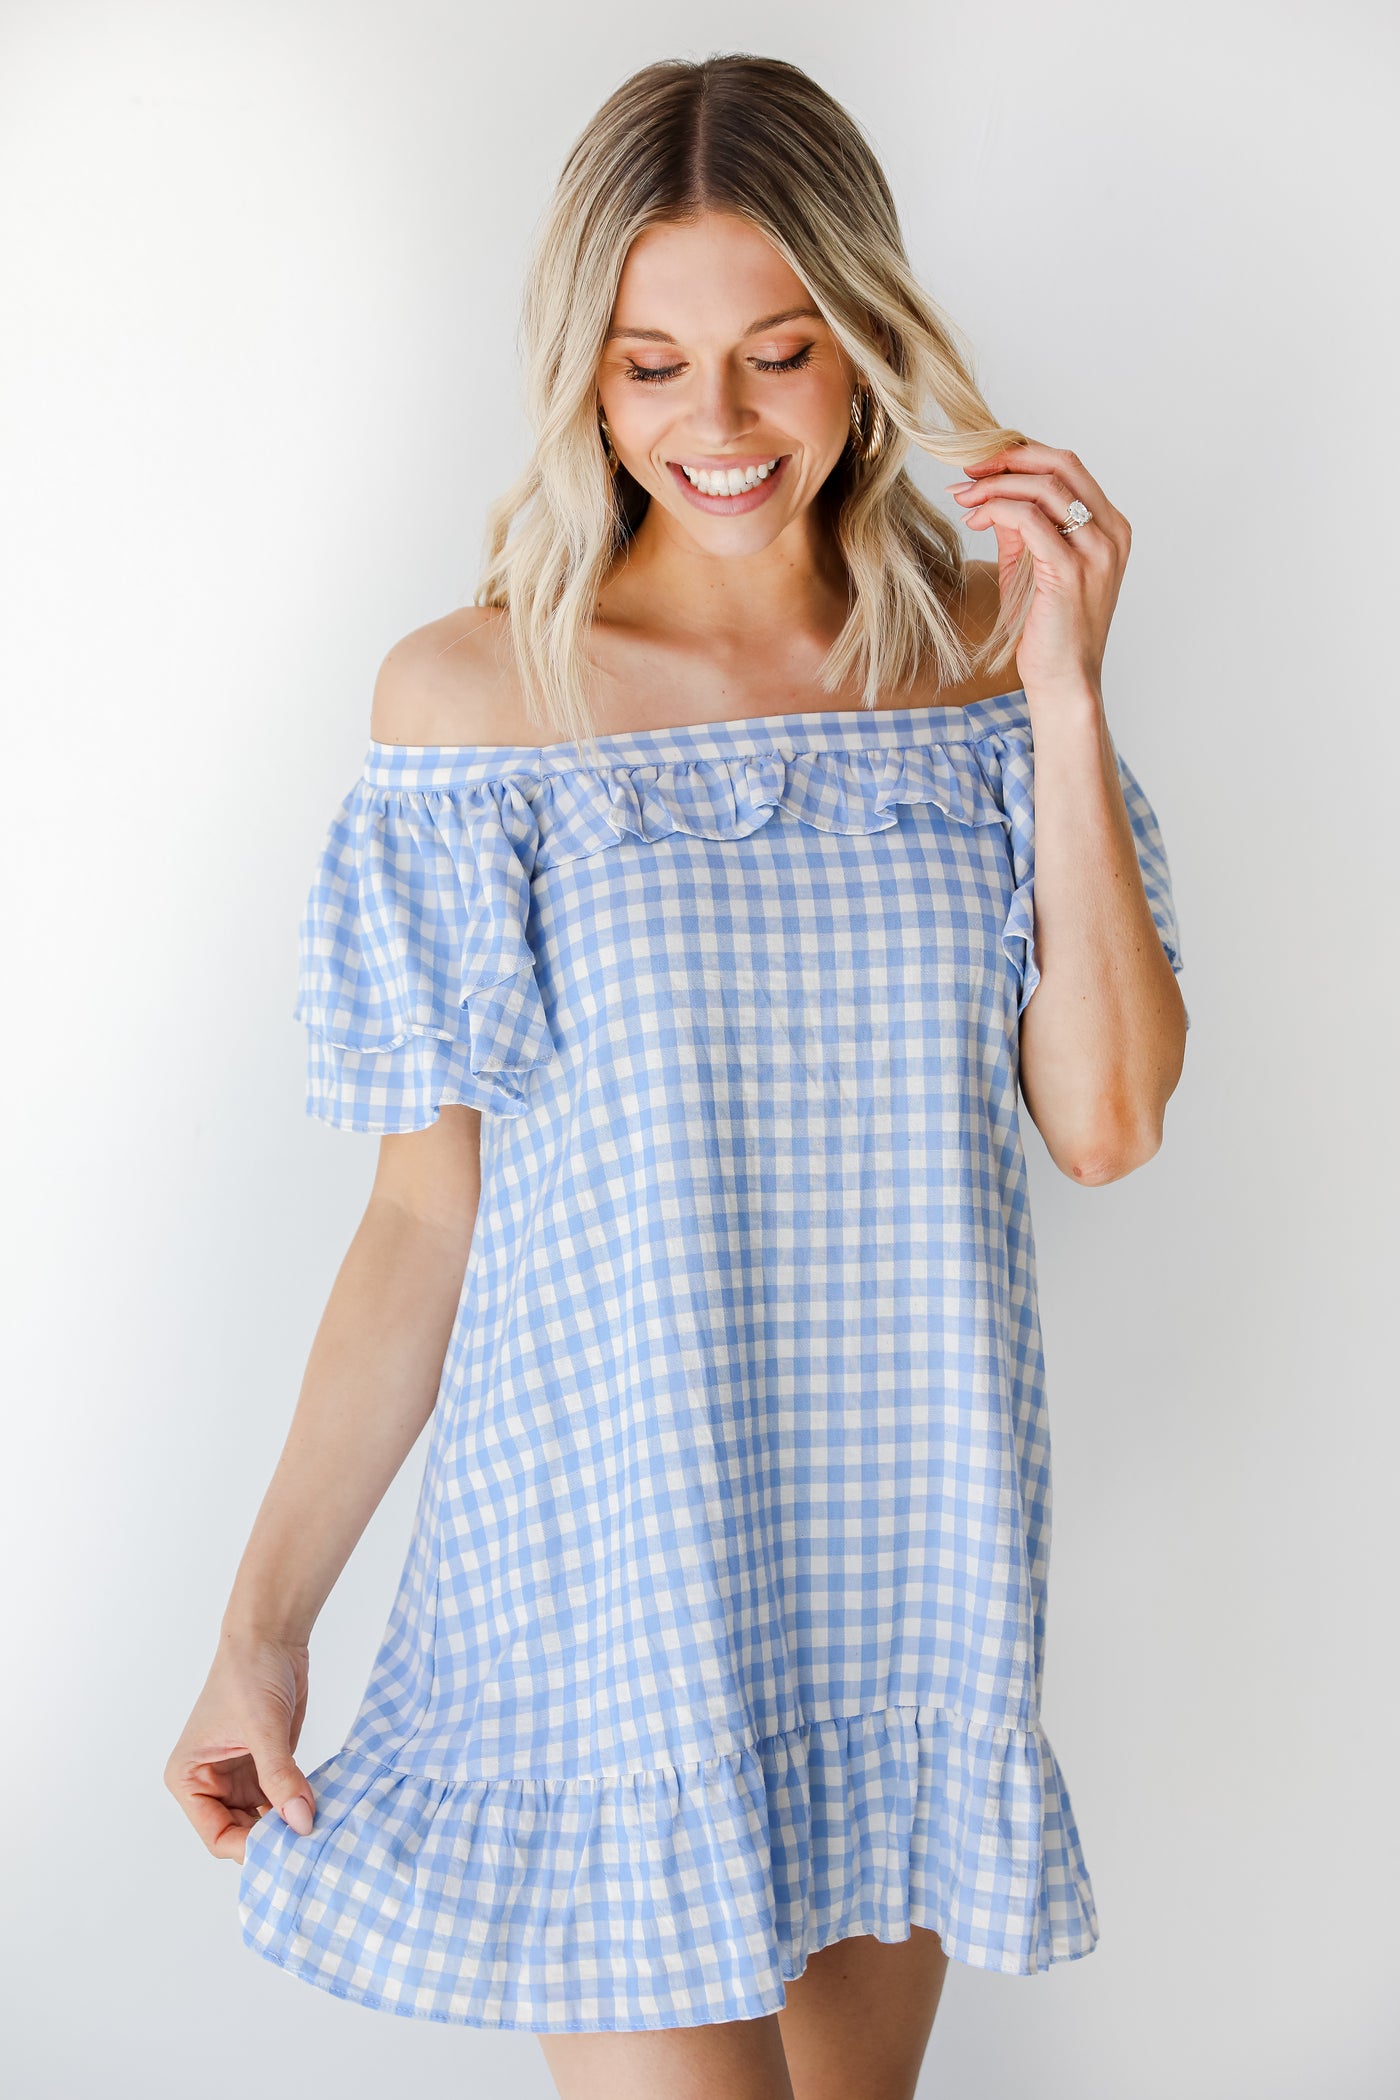 Gingham Mini Dress from dress up